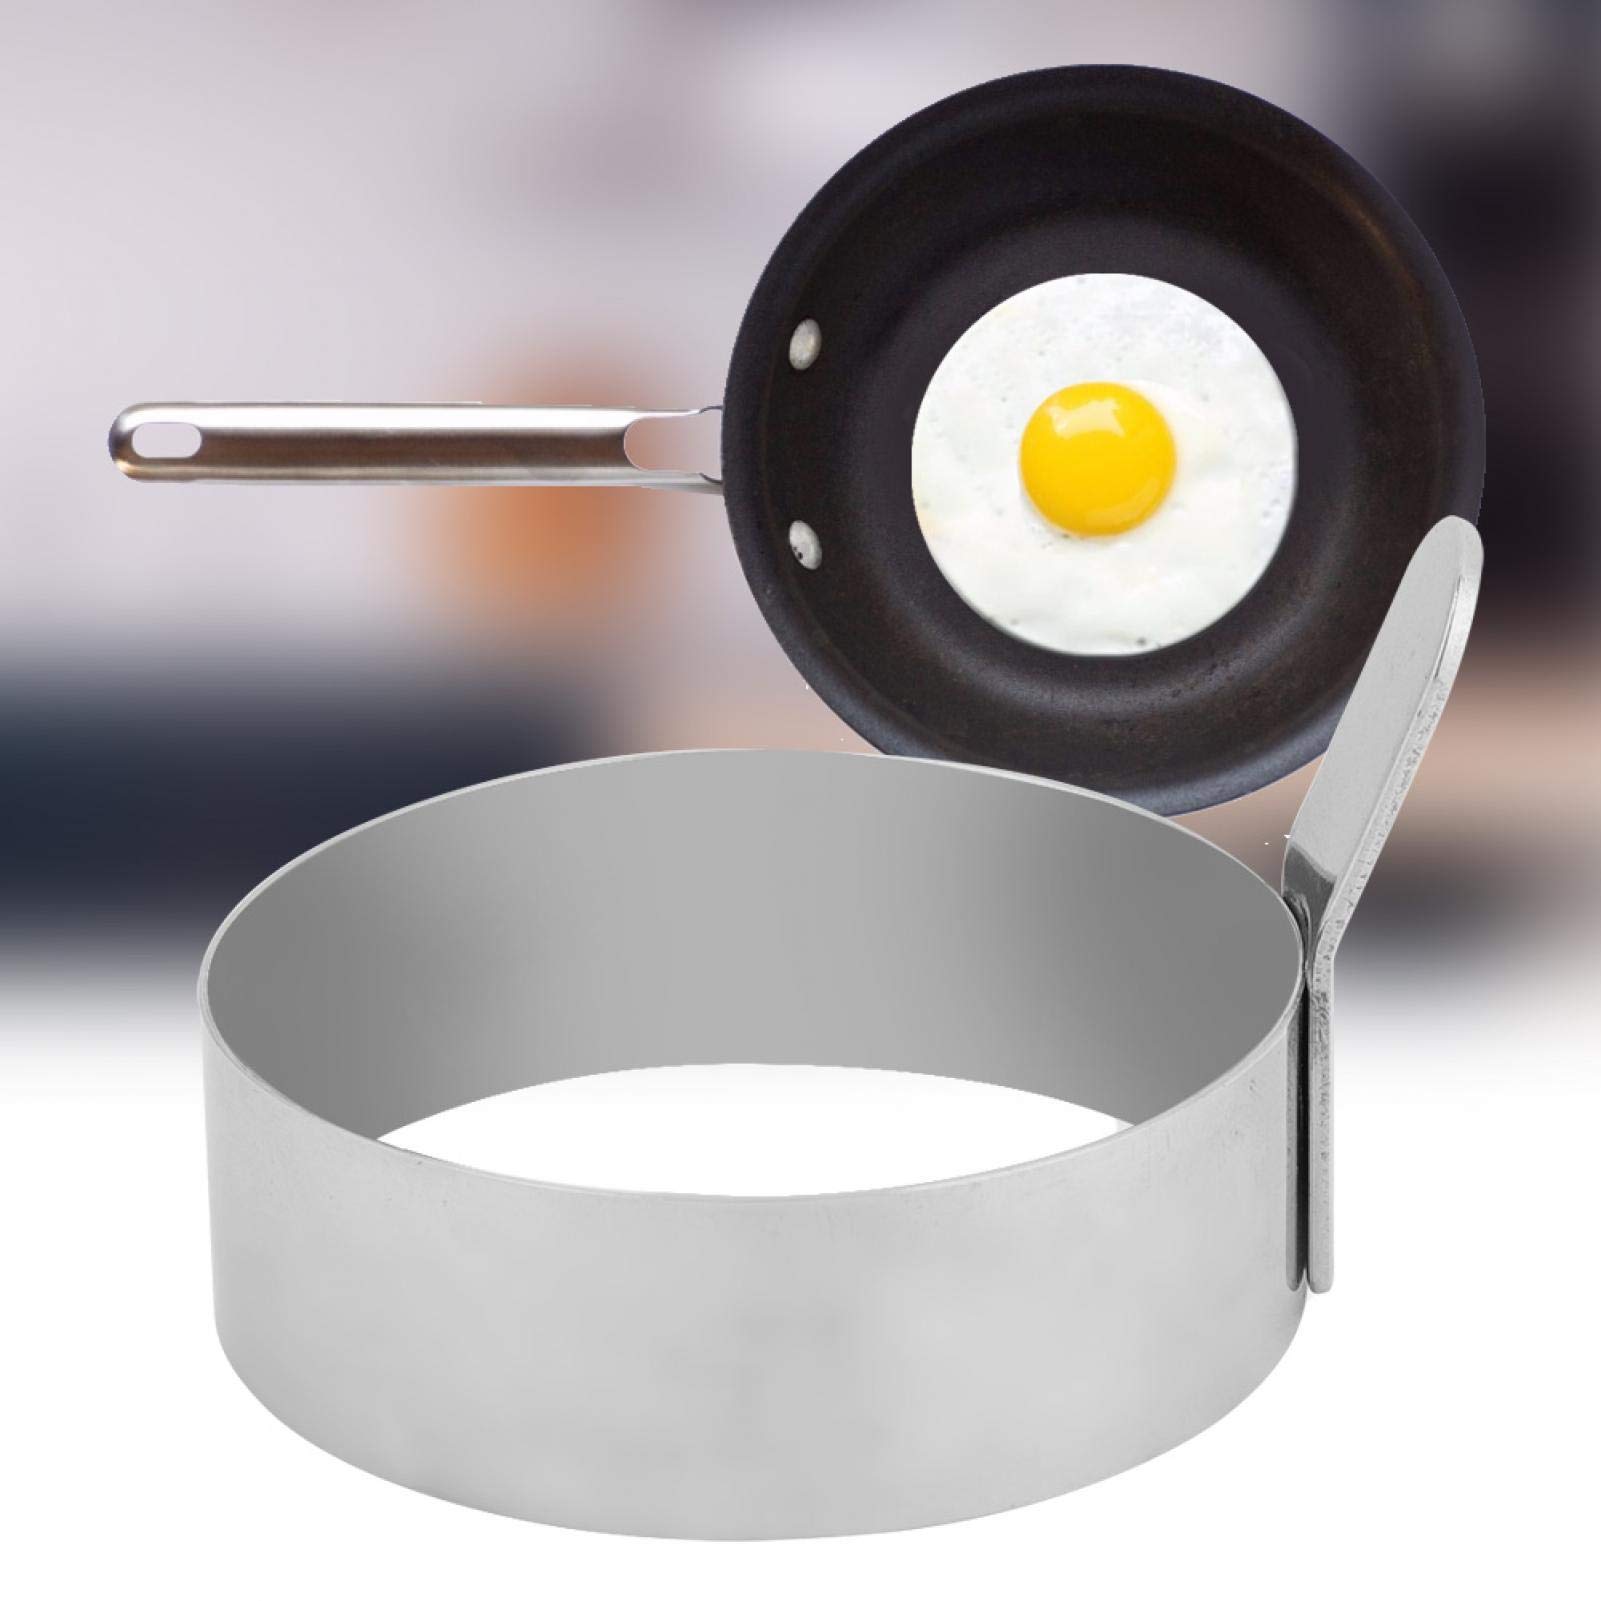 Egg,Stainless Steel Round Pancake s Non Stick Fried Egg Cooking s For Egg McMuffins Omelet Biscuits Sandwiches or Shaping Eggs (L)